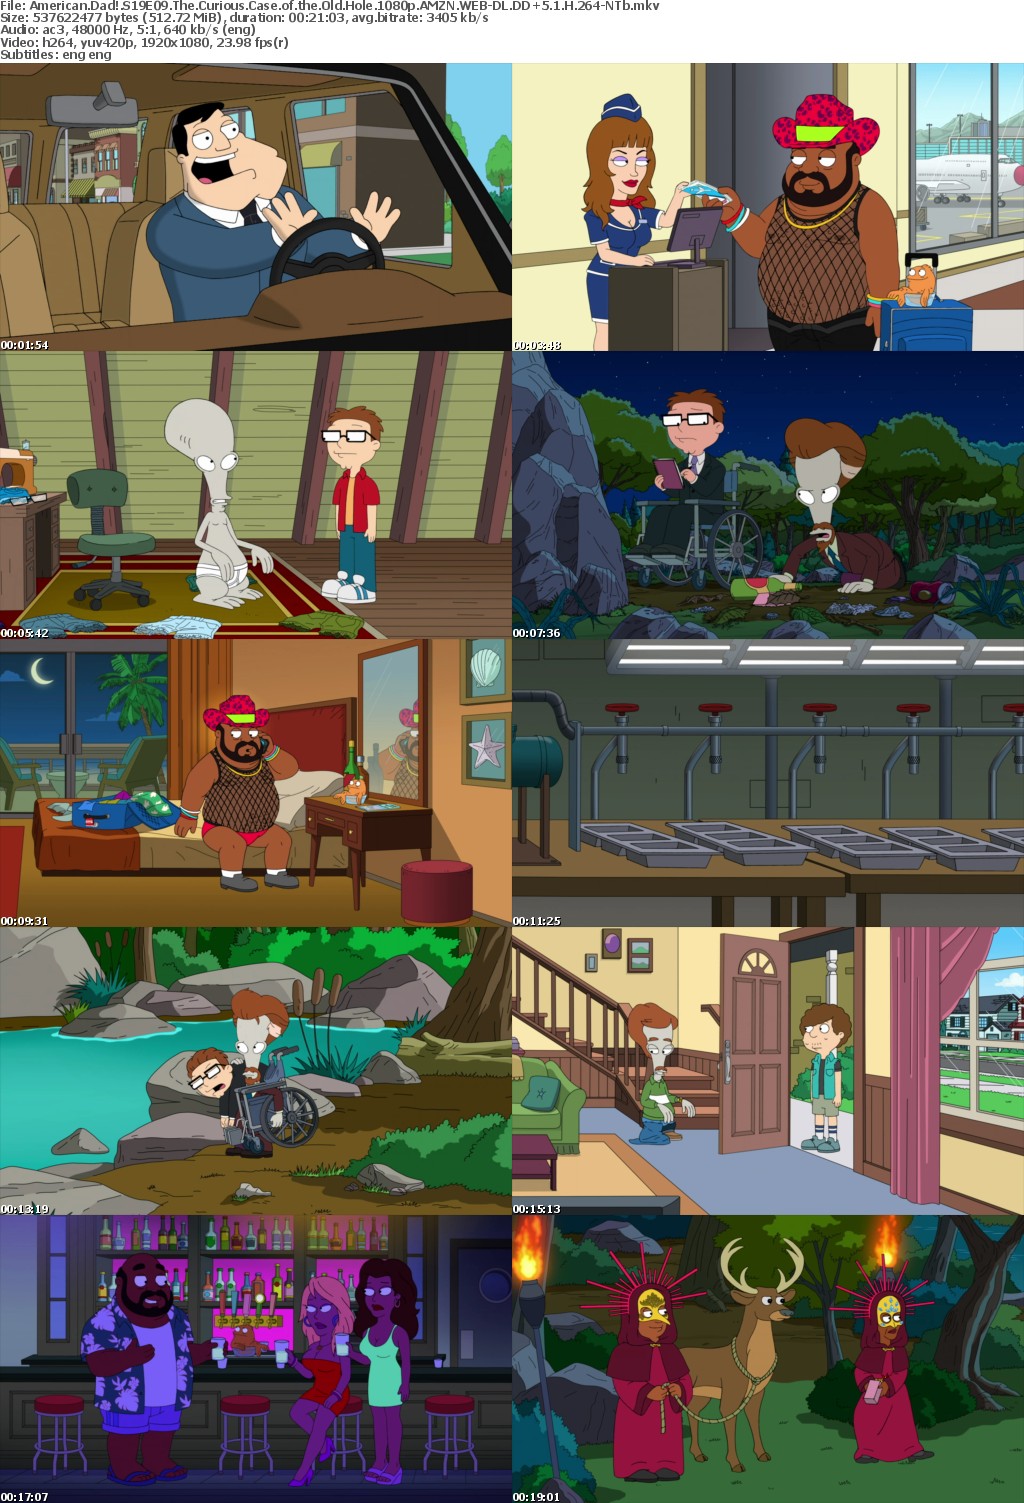 American Dad S19E09 The Curious Case of the Old Hole 1080p AMZN WEBRip DDP5 1 x264-NTb